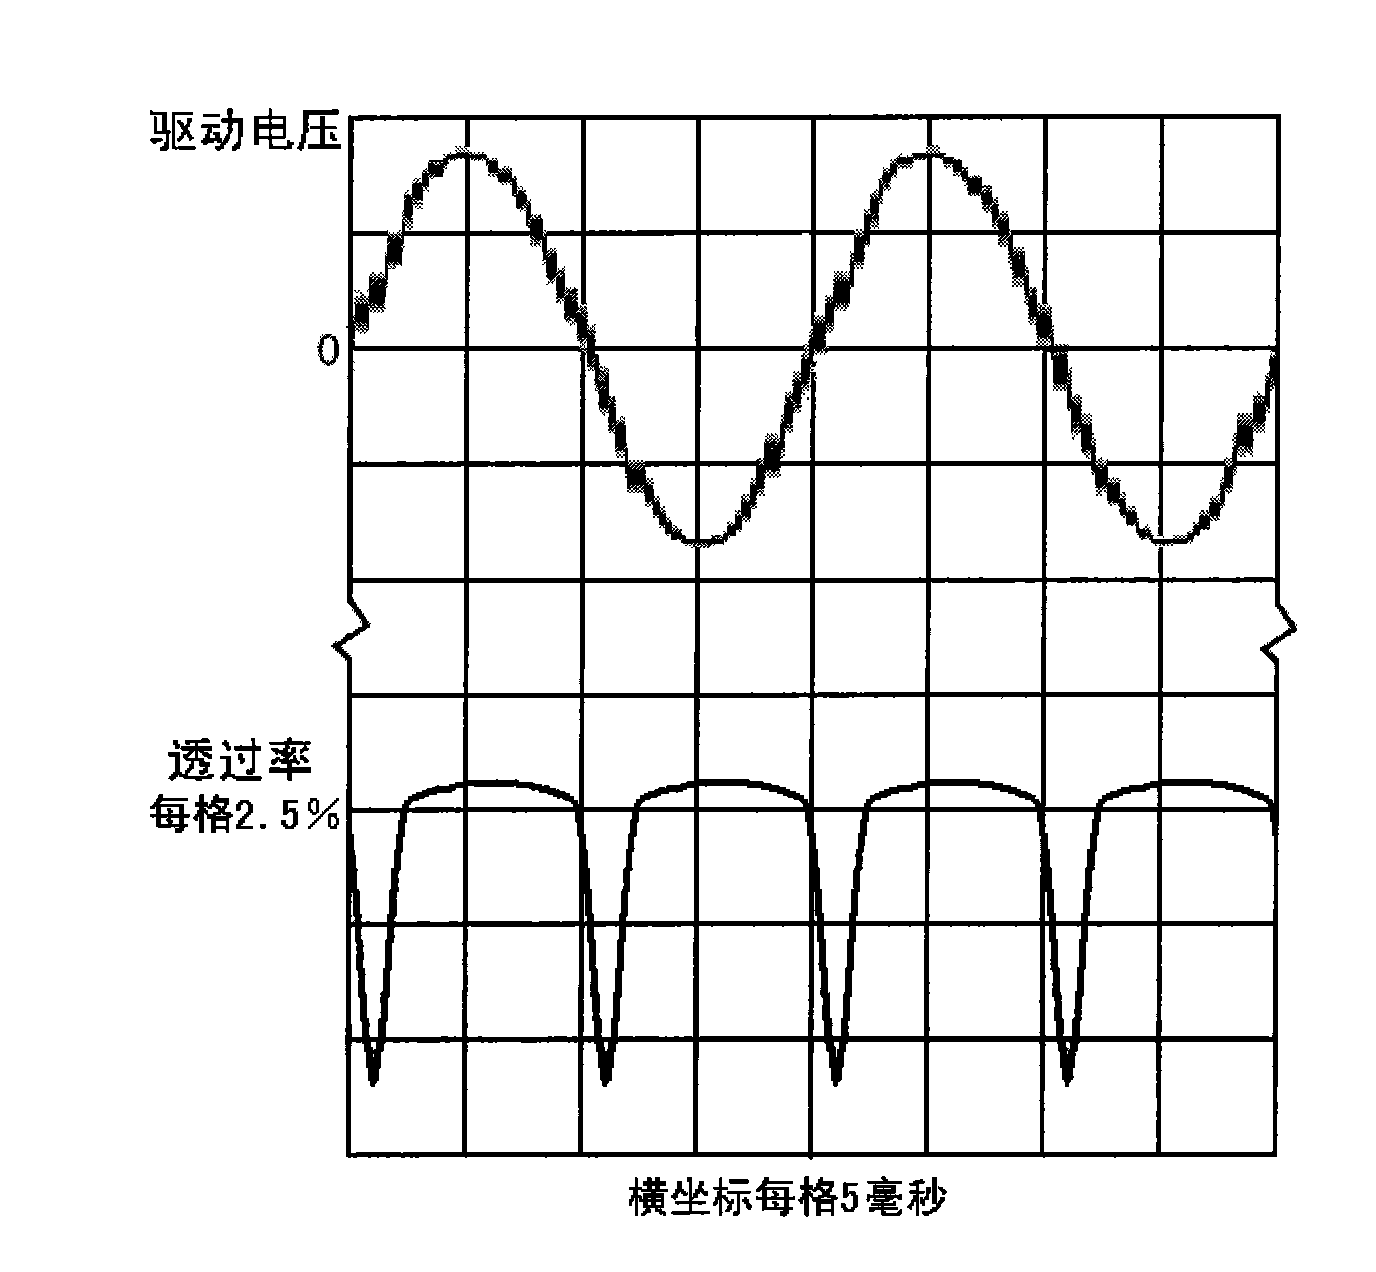 Drive method and circuit for Polymer Dispersed Liquid Crystal (PDLC)